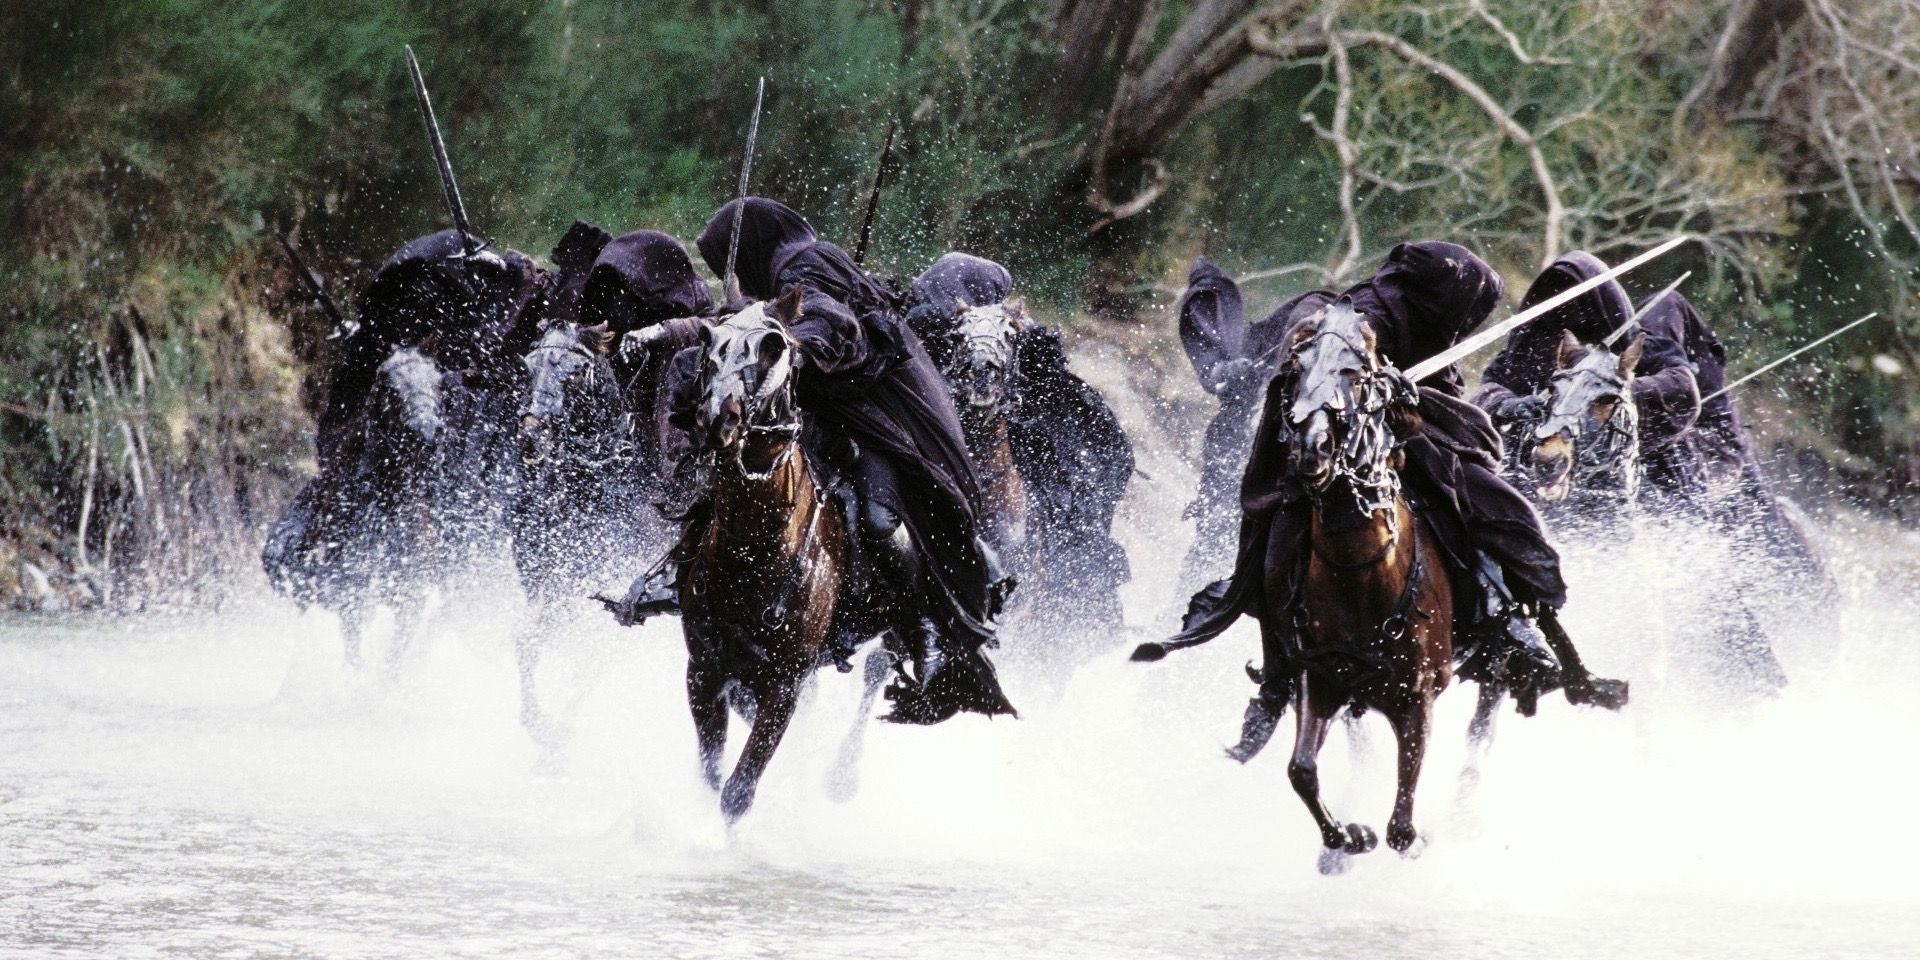 Nazgul Ringwraiths in The Lord of the Rings The Fellowship of the Ring